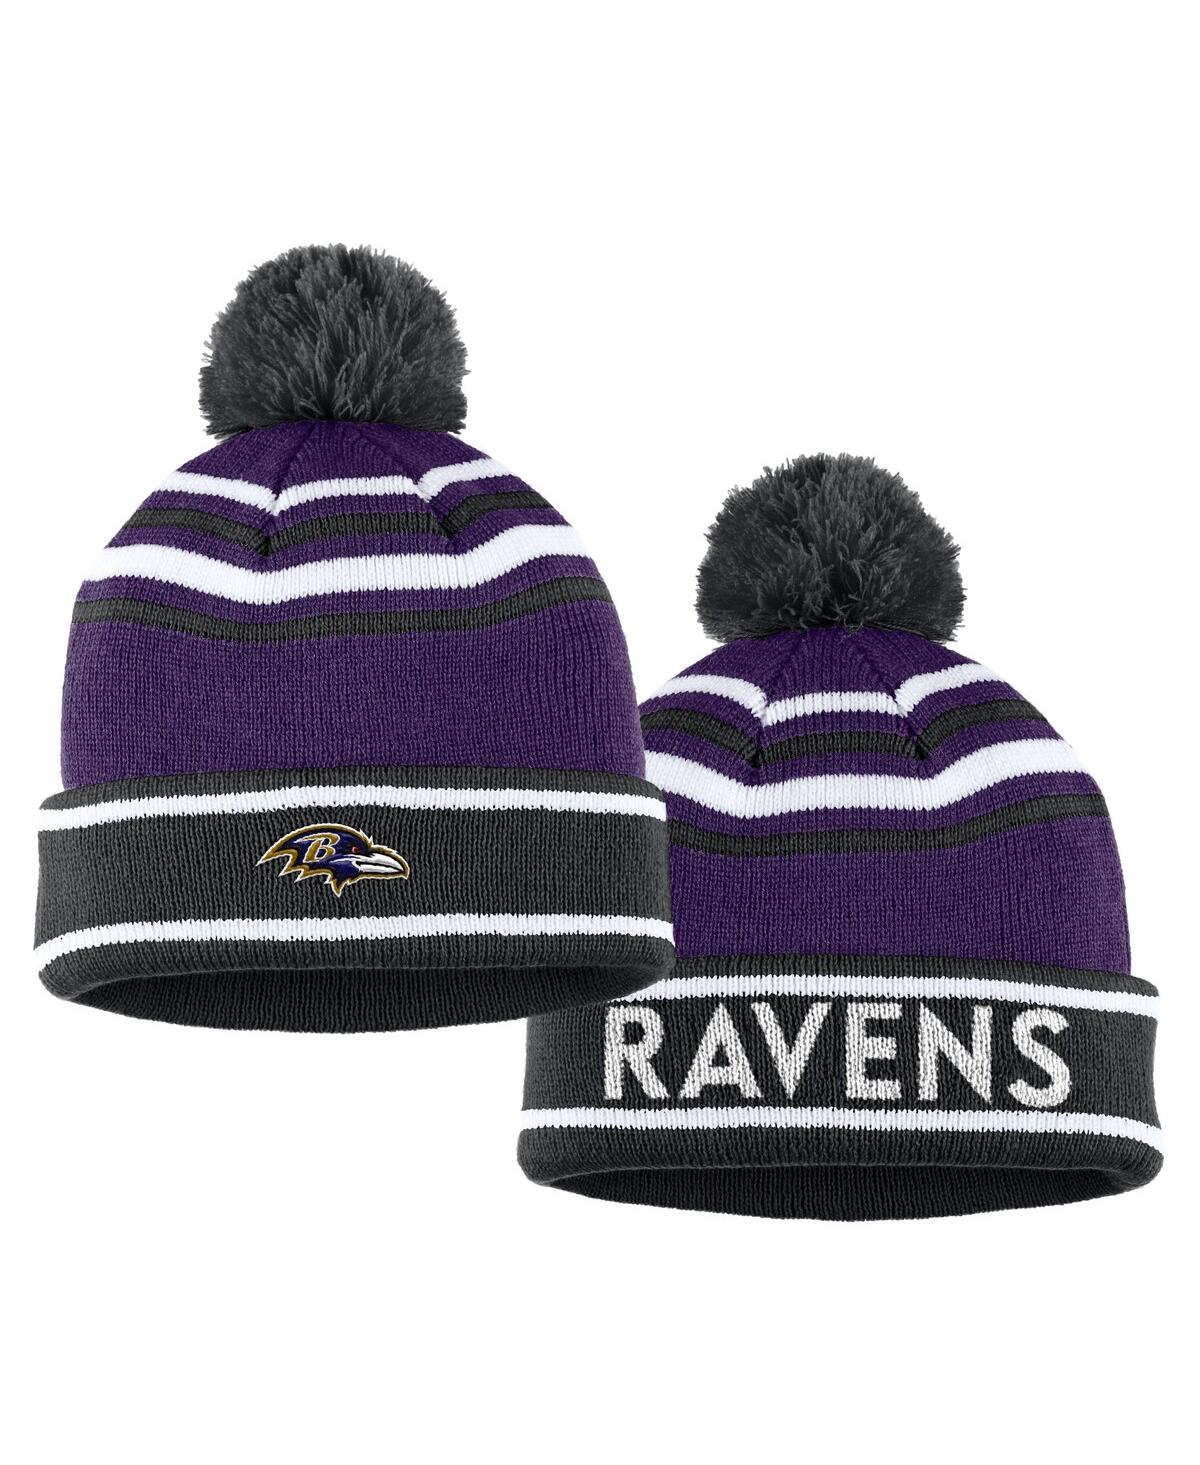 Shop Wear By Erin Andrews Women's  Purple Baltimore Ravens Colorblock Cuffed Knit Hat With Pom And Scarf S